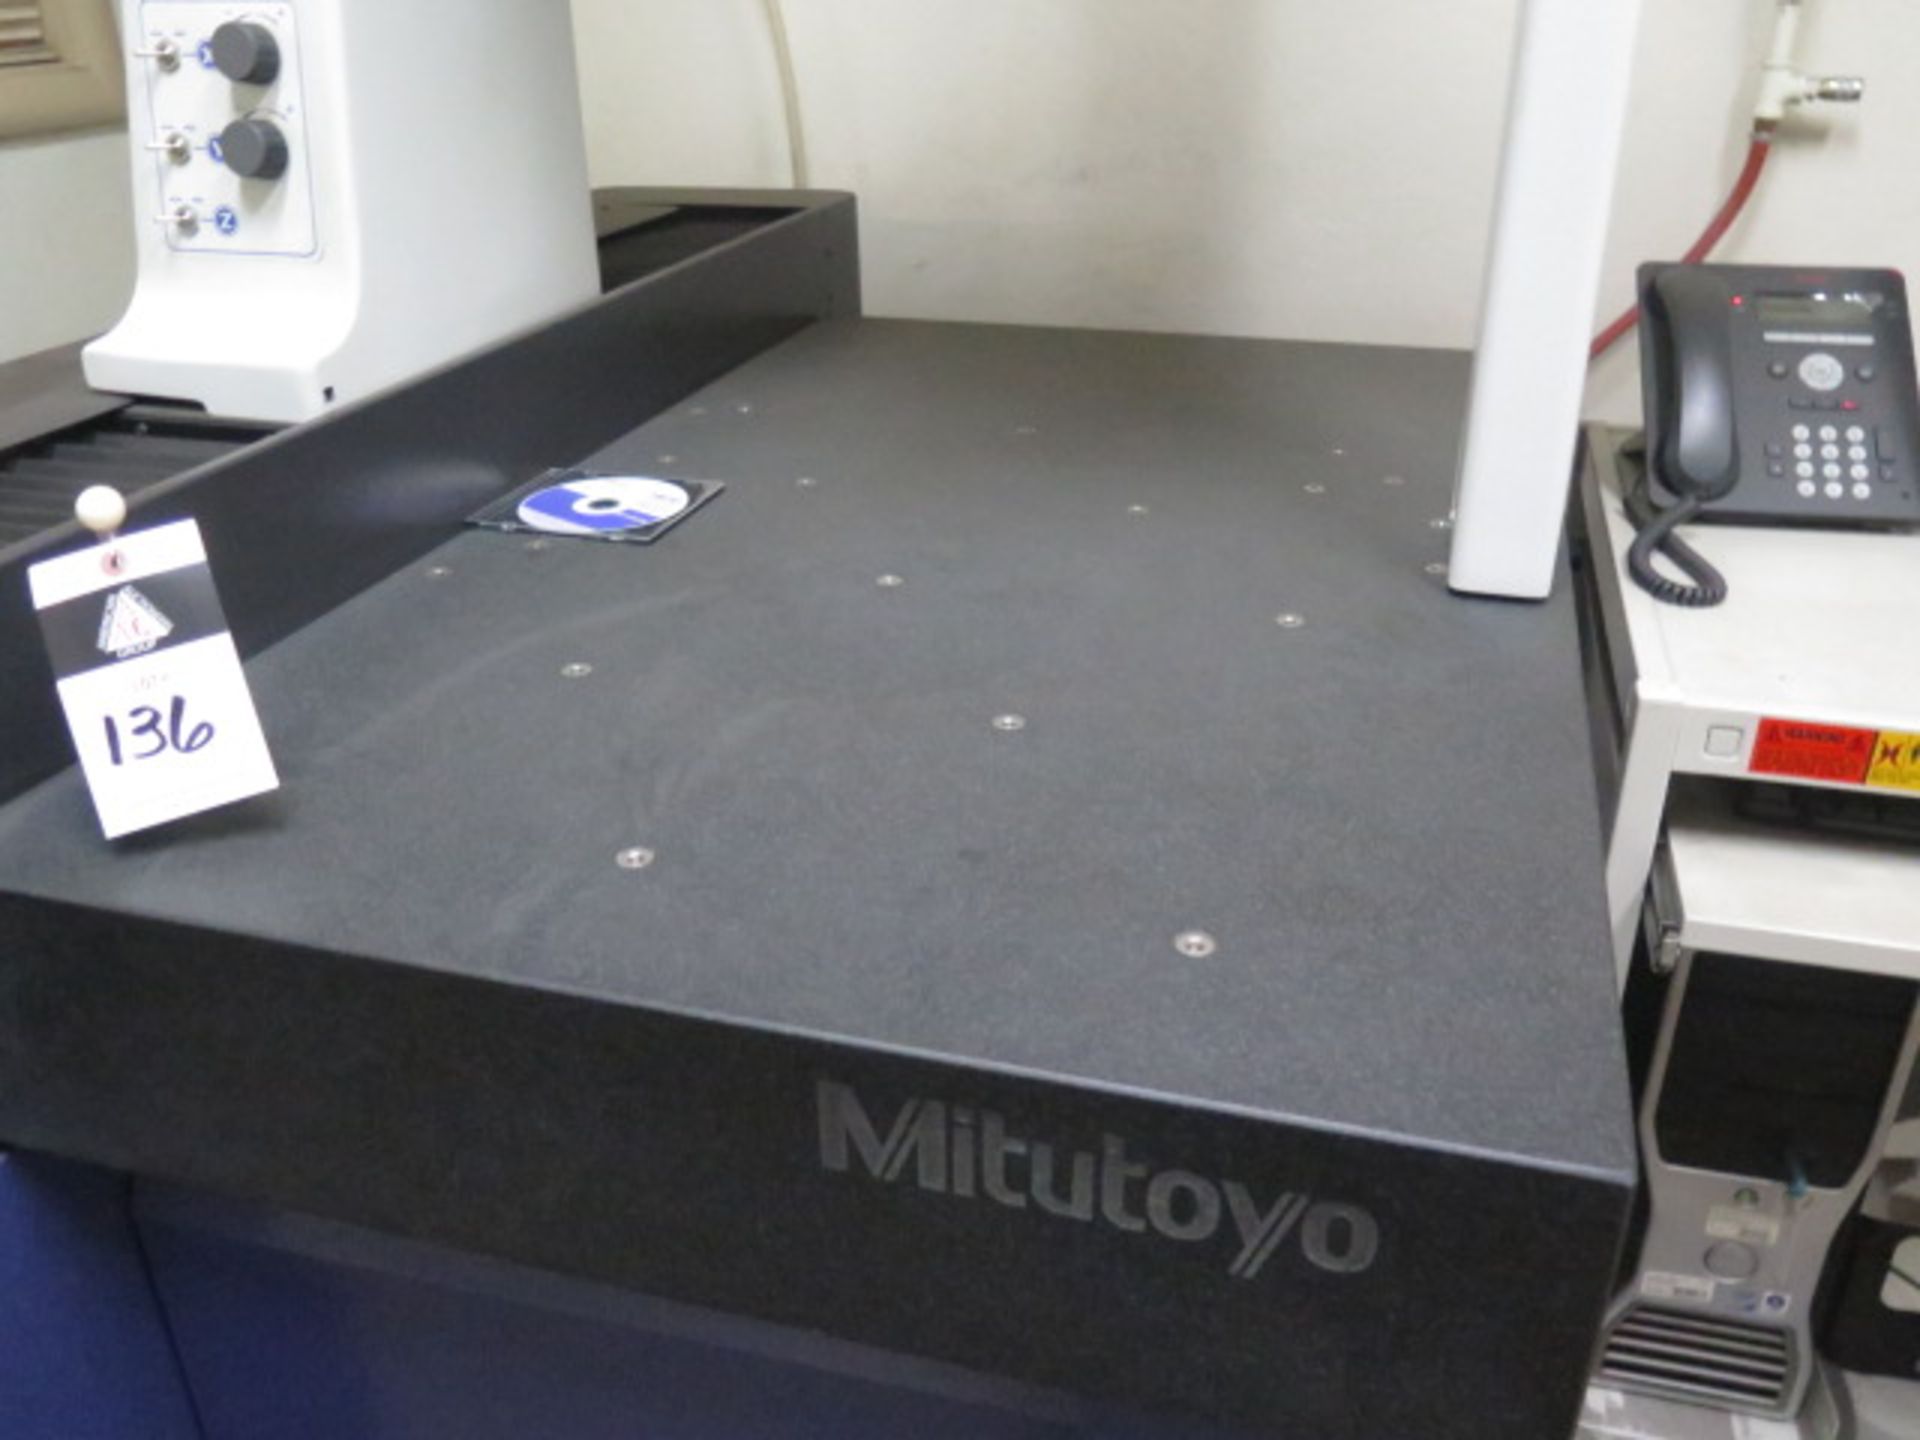 Mitutoyo Crysta-PlusM 574 CMM s/n 01568101 w/ Renishaw MH20i Probe Head, Mitutoyo MiCAT, SOLD AS IS - Image 8 of 13